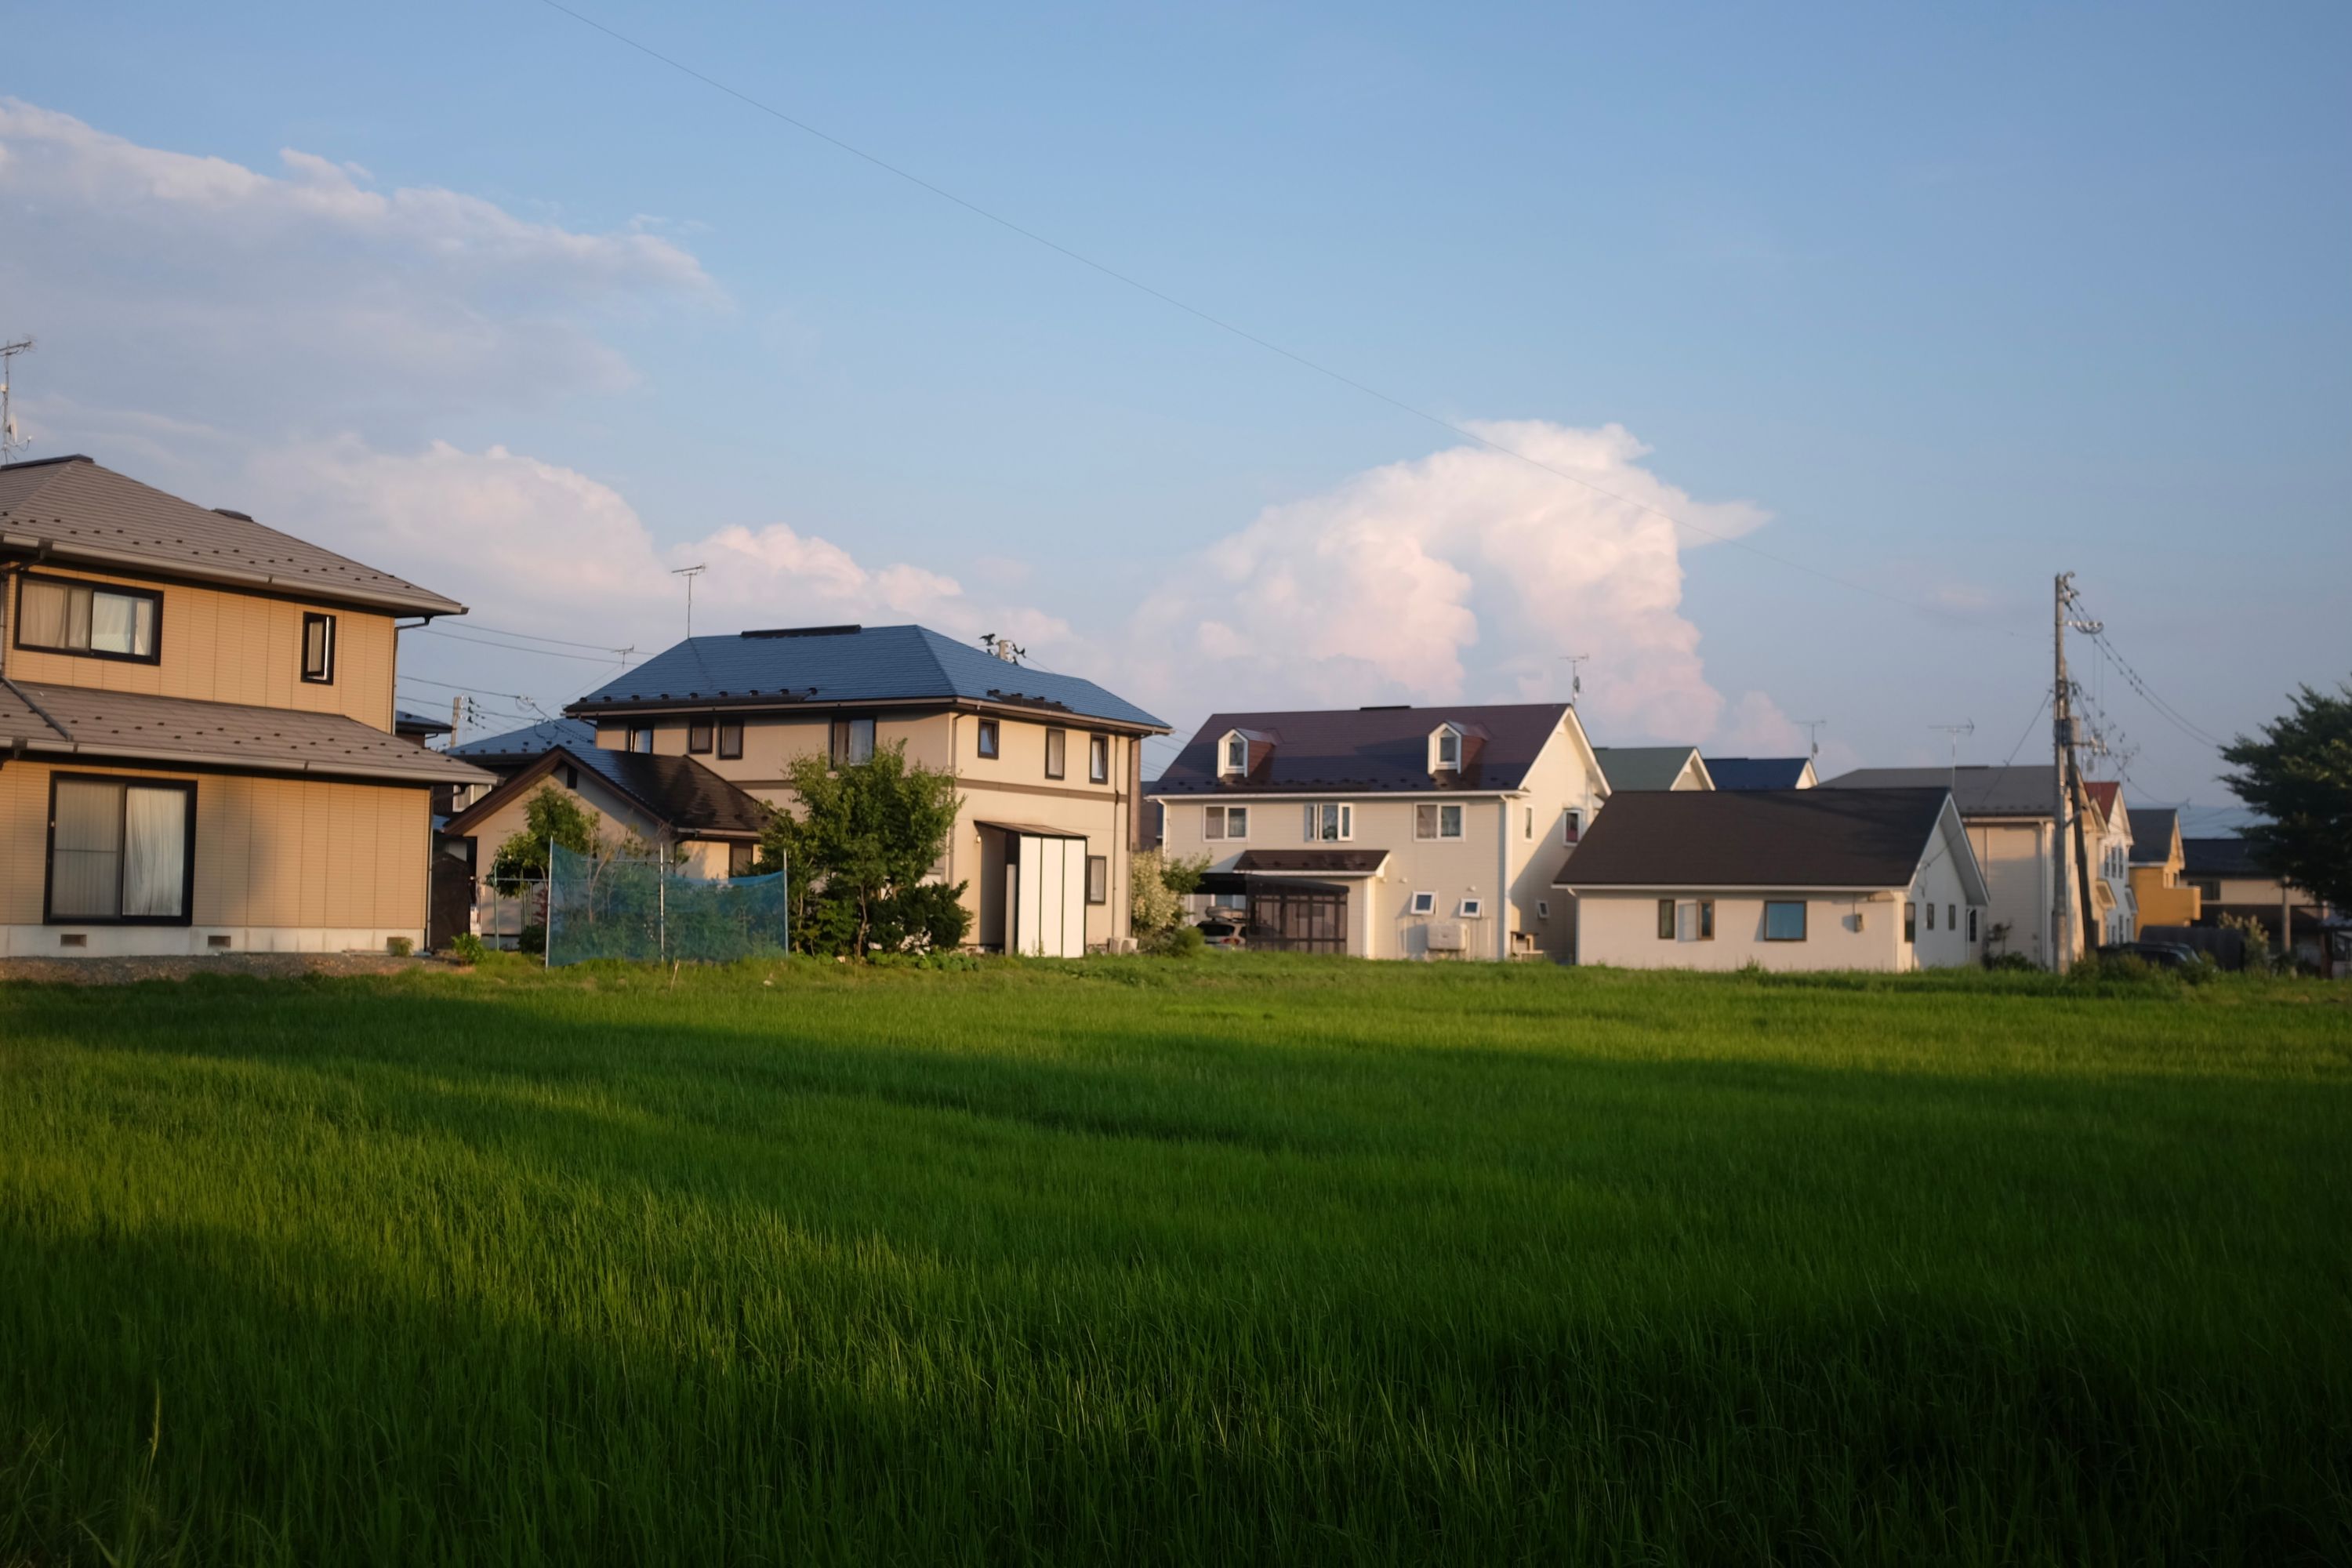 Modern villages houses at the edge of a green rice field.